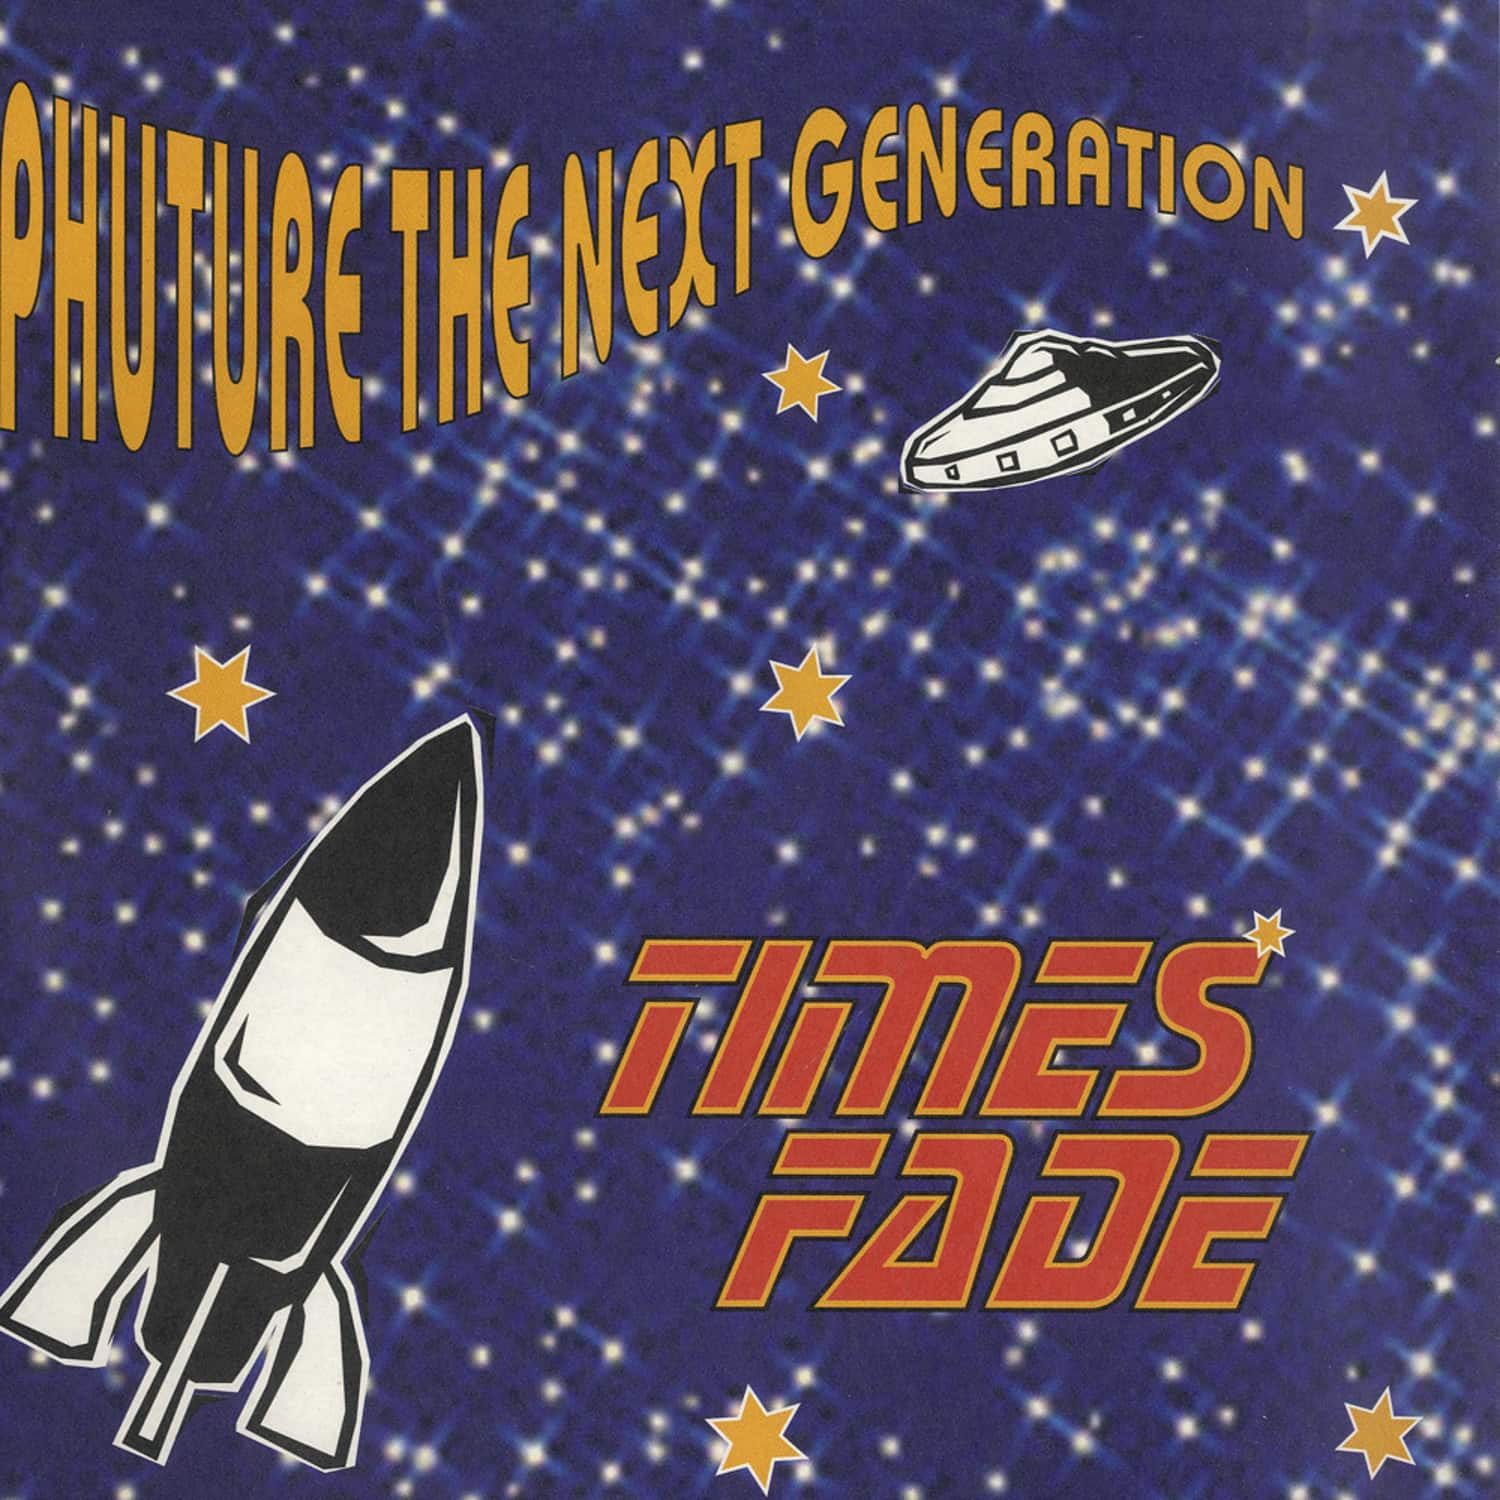 Phuture The Next Generation - TIMES FADE